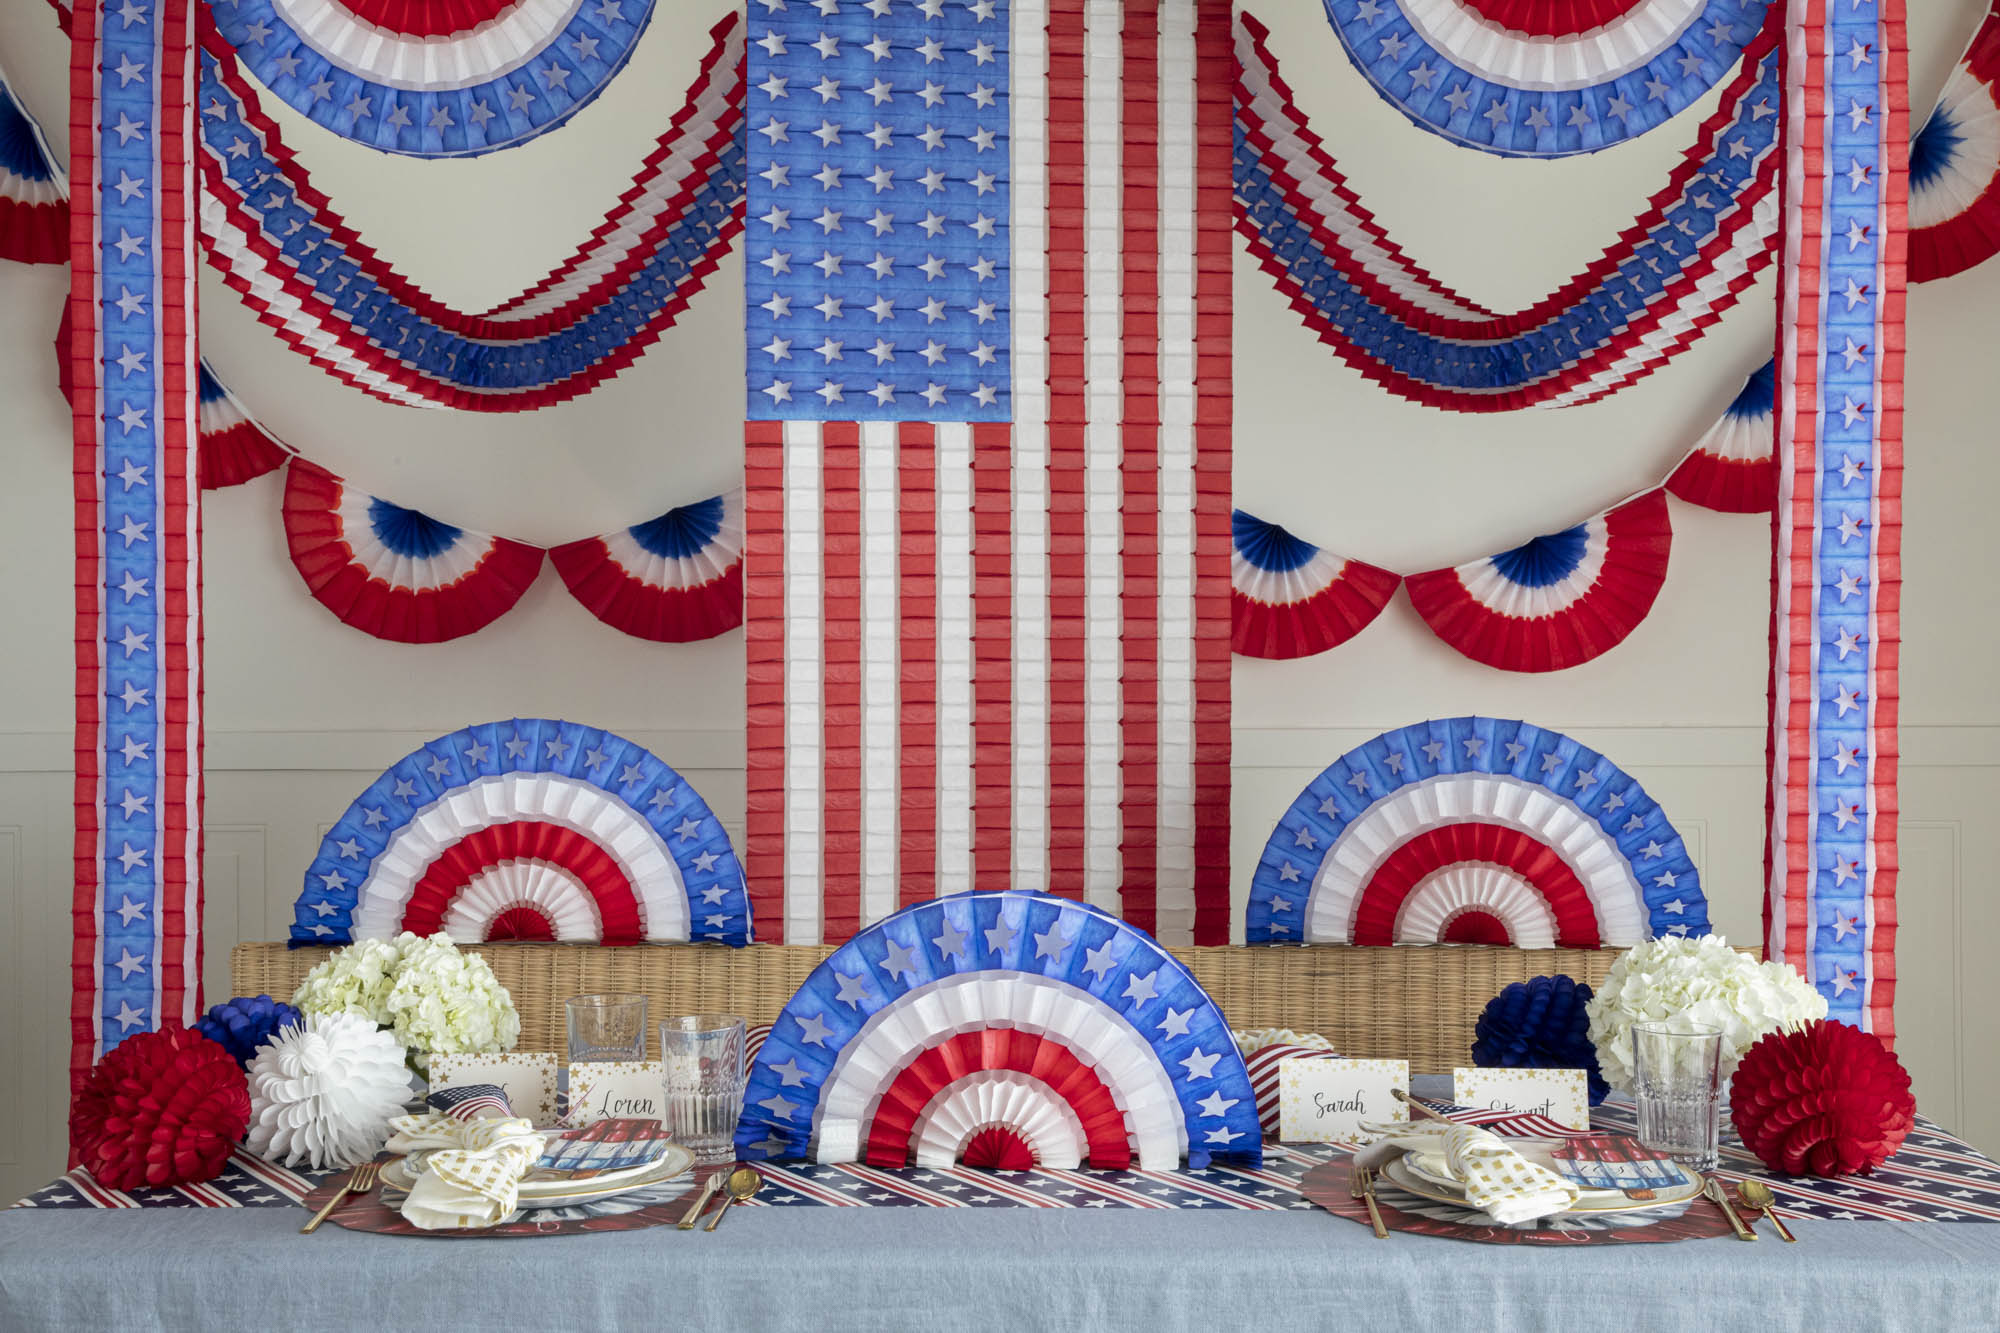 A patriotic table set up with red, white and blue decorations.